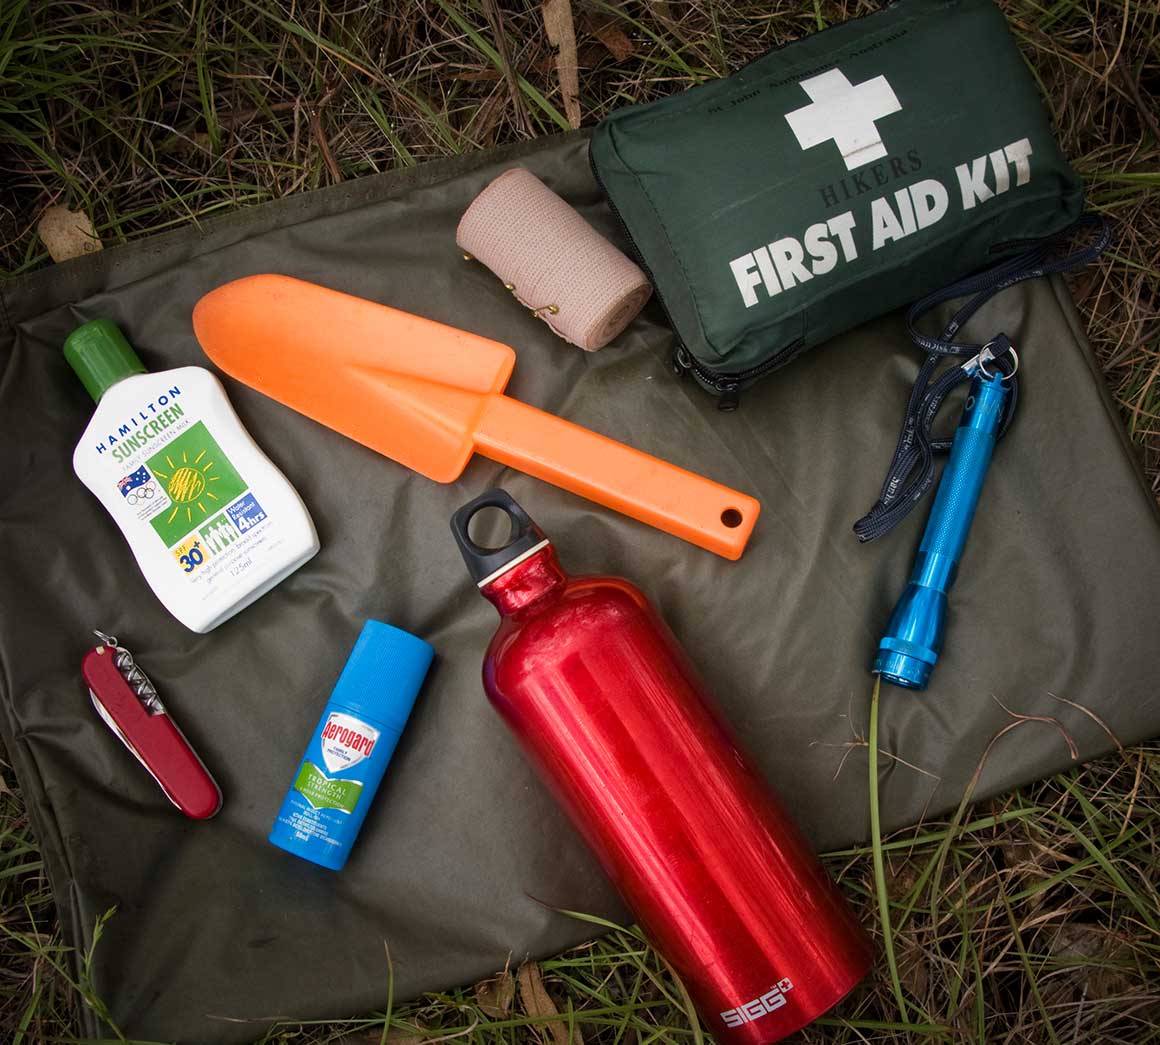 First aid kit, pocket knife, insect repellent, water bottle, sunscreen, bandage, torch and shovel